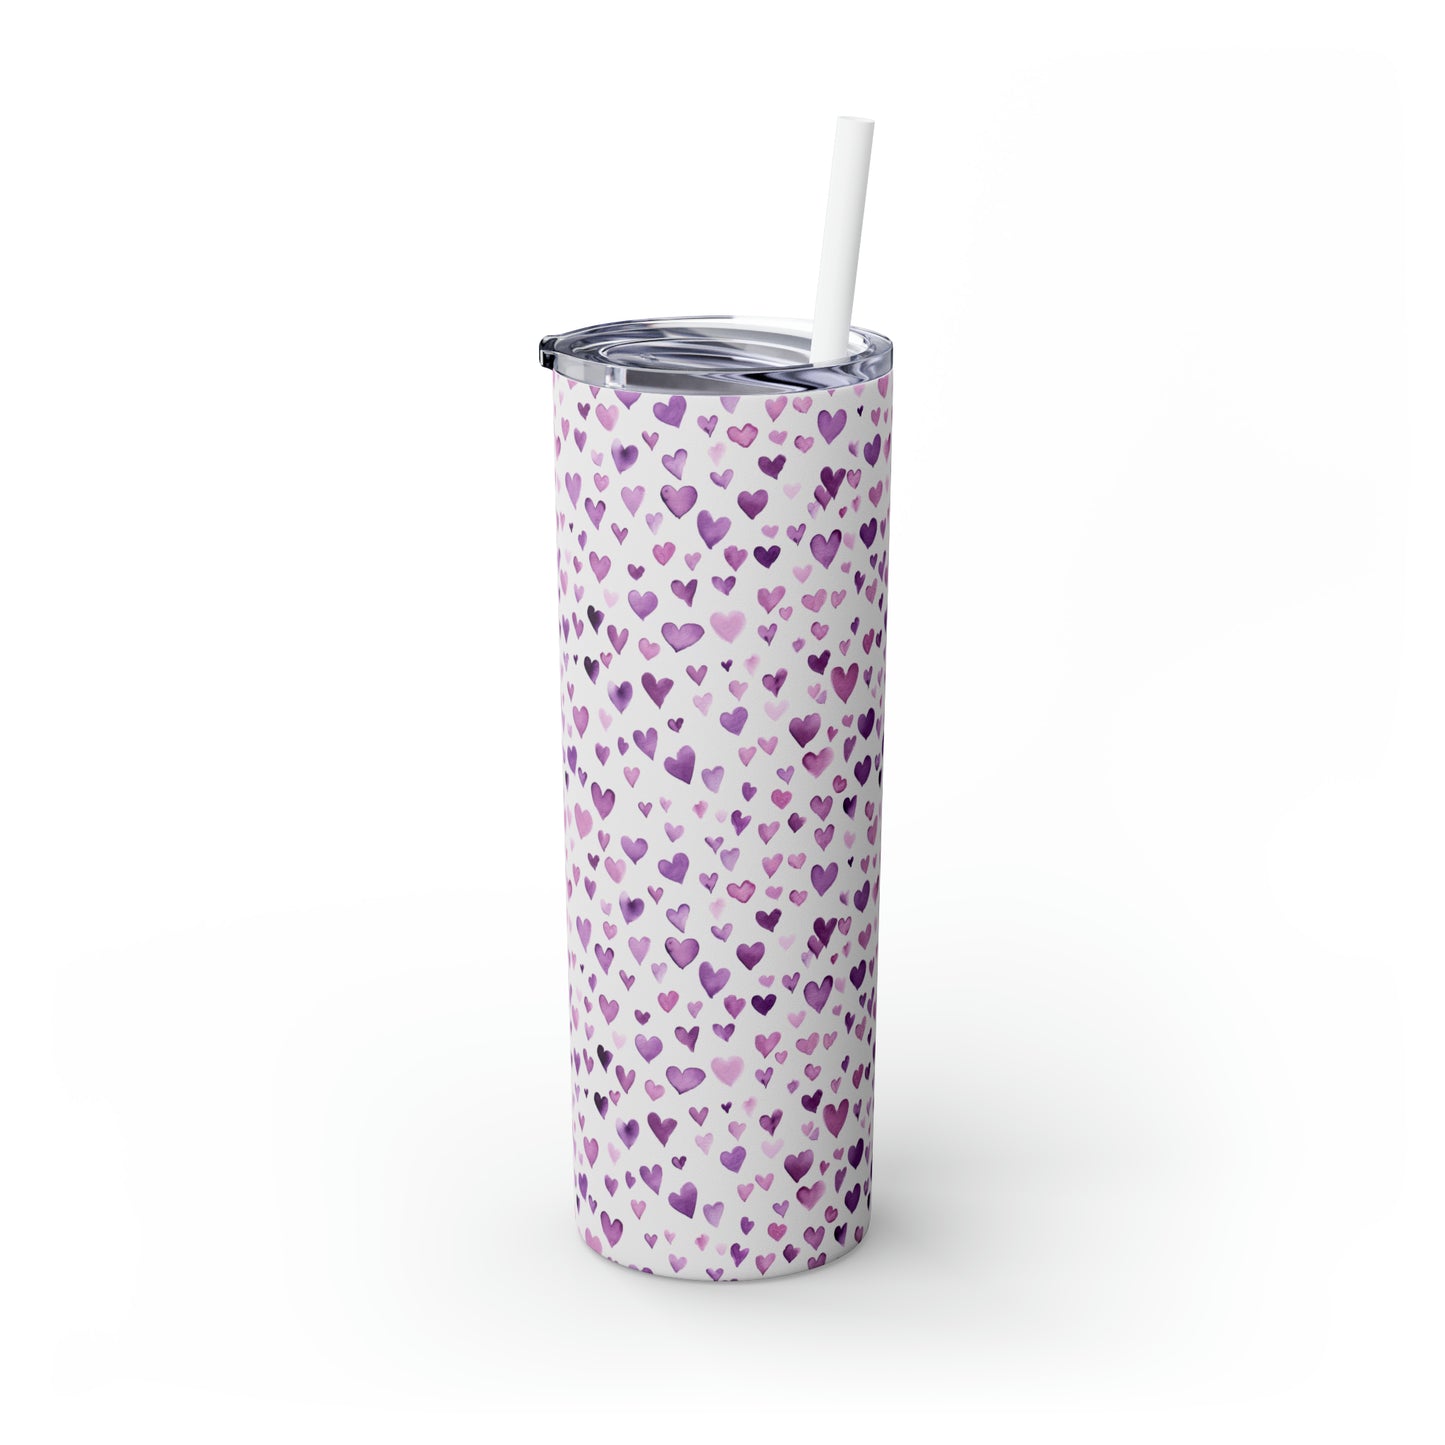 Mini Love Hearts - Purple Floating Hearts - Skinny Tumbler with Straw, 20oz - Stainless Steel